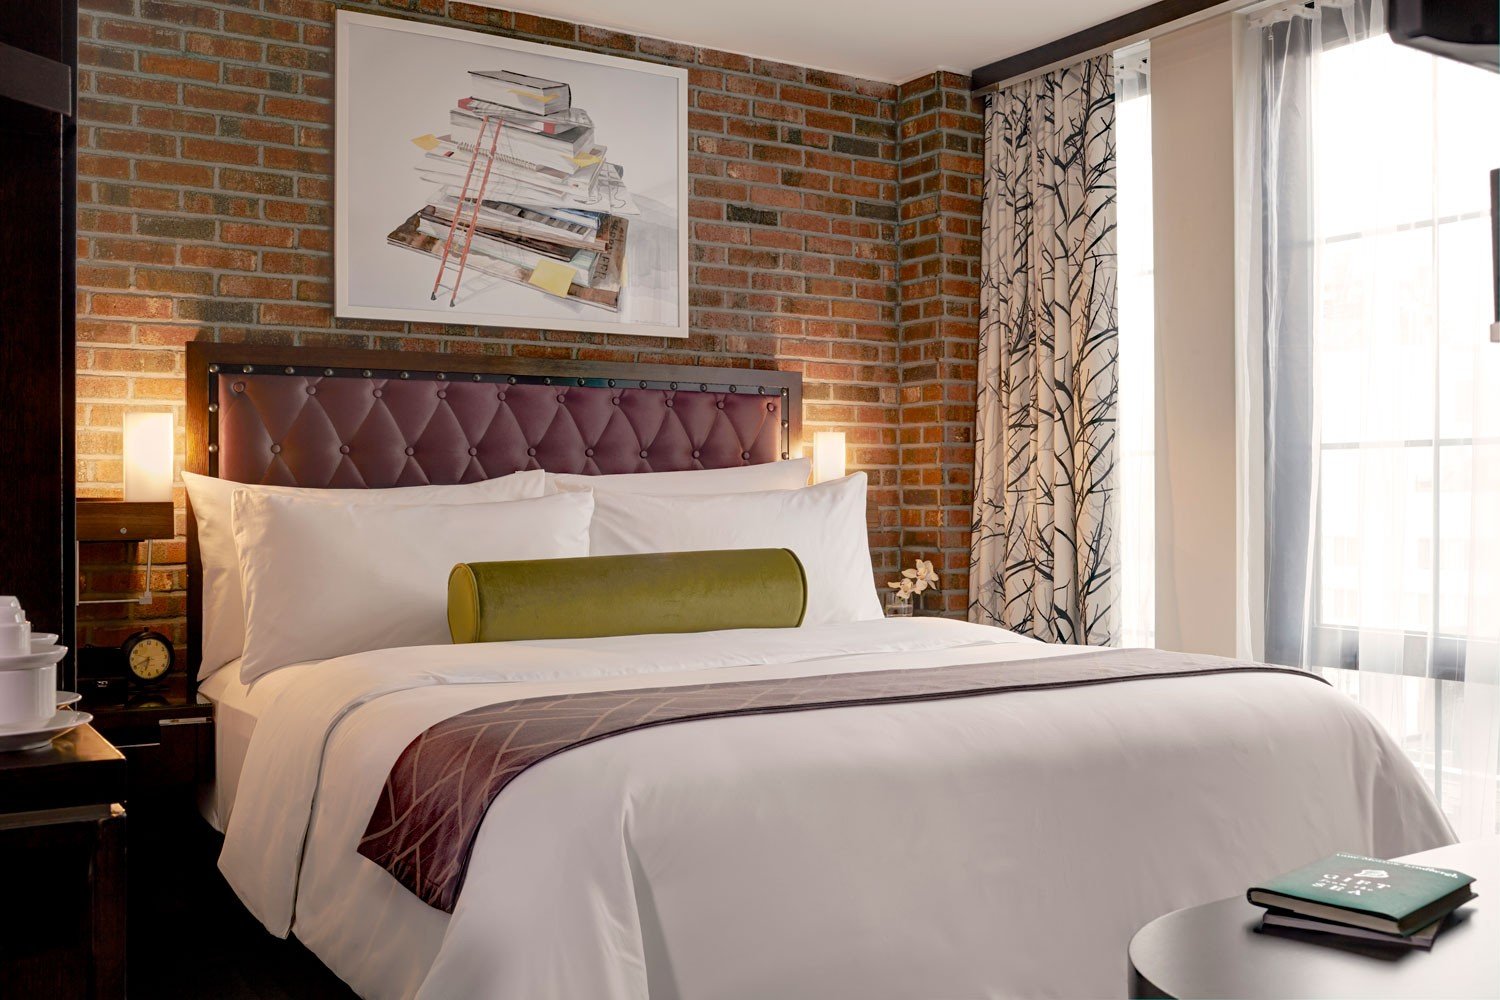 Archer Hotel New York - King Guestroom with brick wall